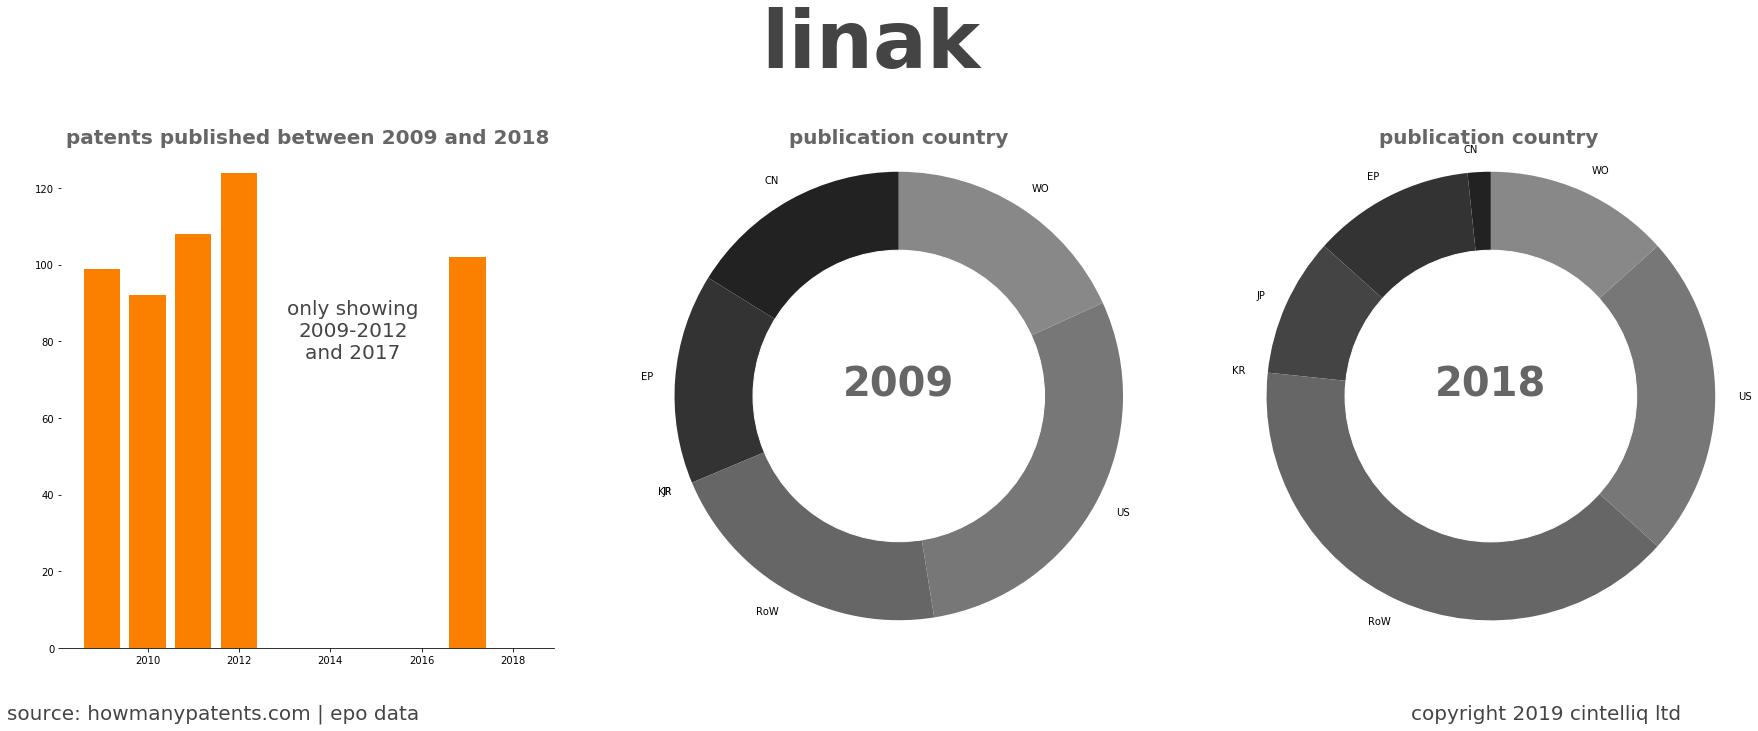 summary of patents for Linak